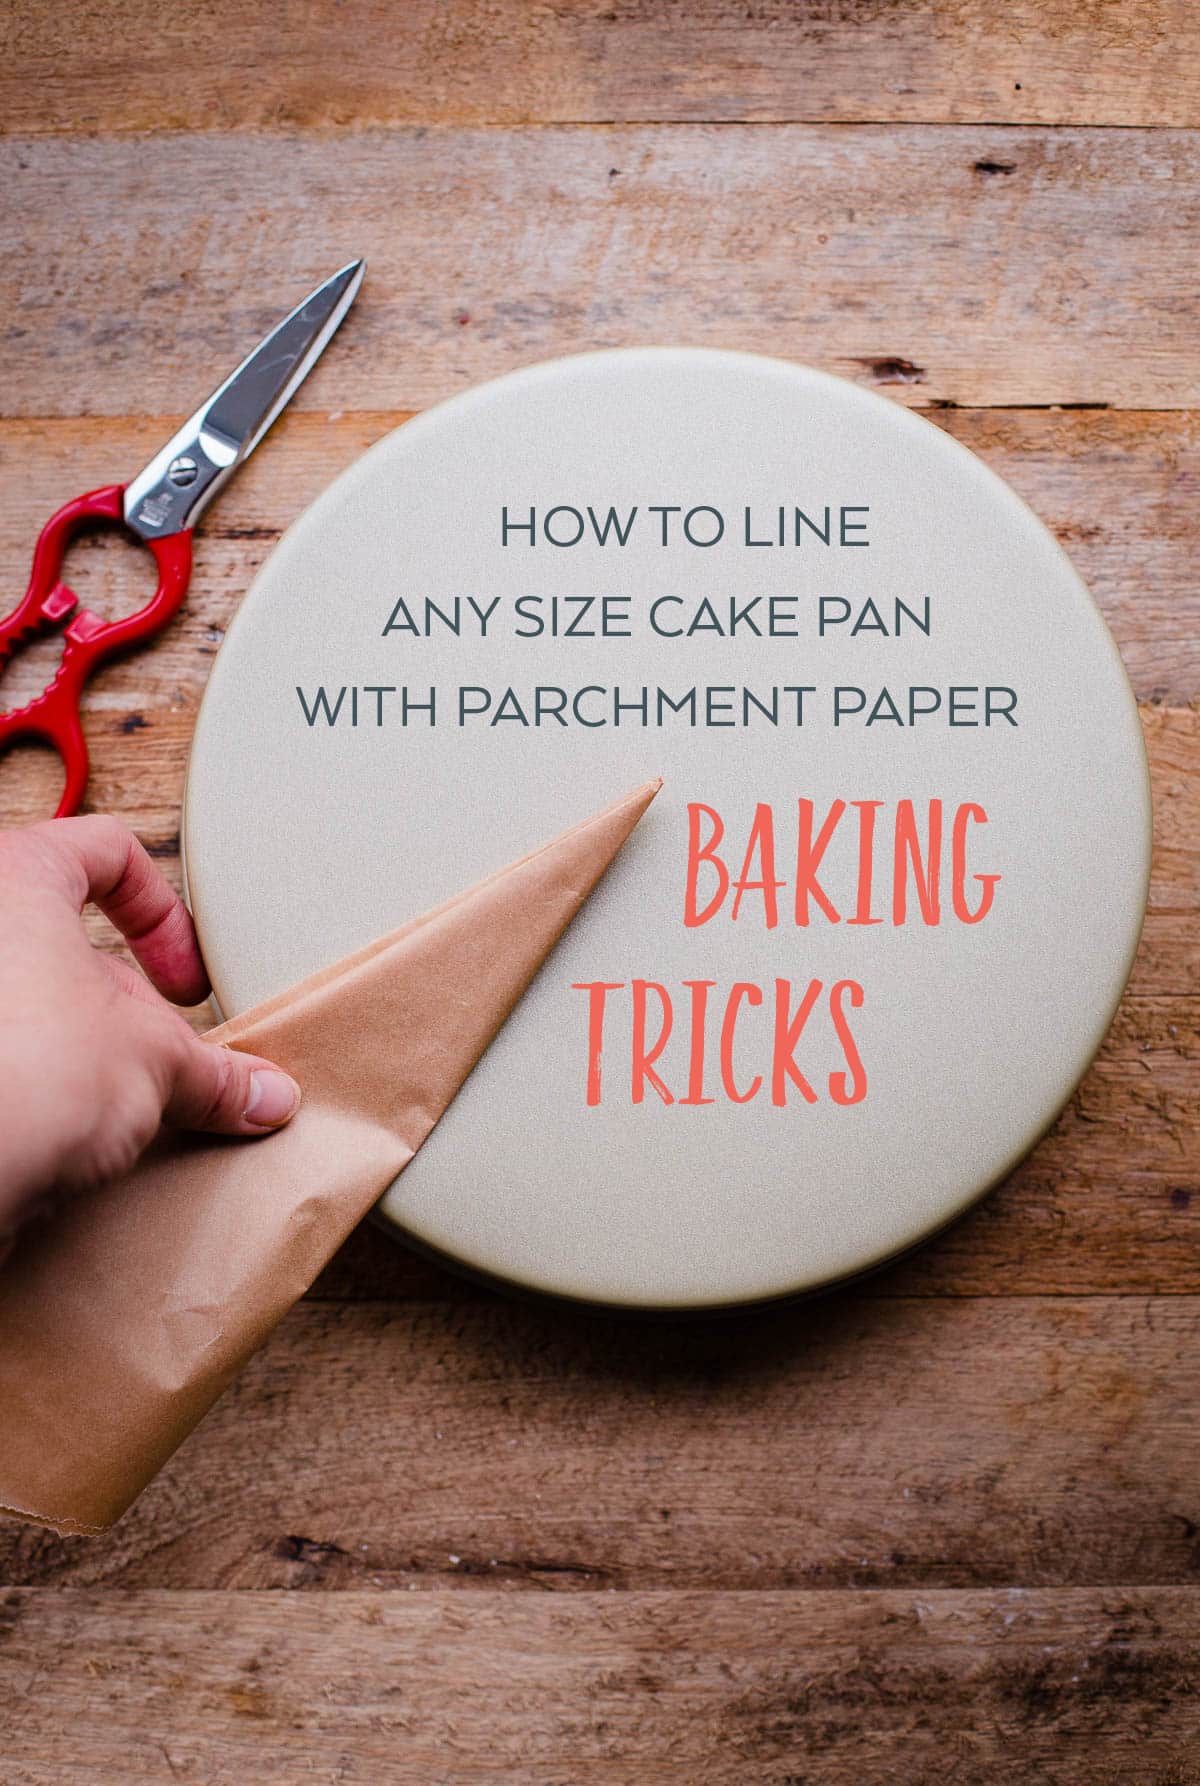 https://www.abeautifulplate.com/wp-content/uploads/2017/02/how-to-line-any-size-cake-pan-with-parchment-paper-1.jpg